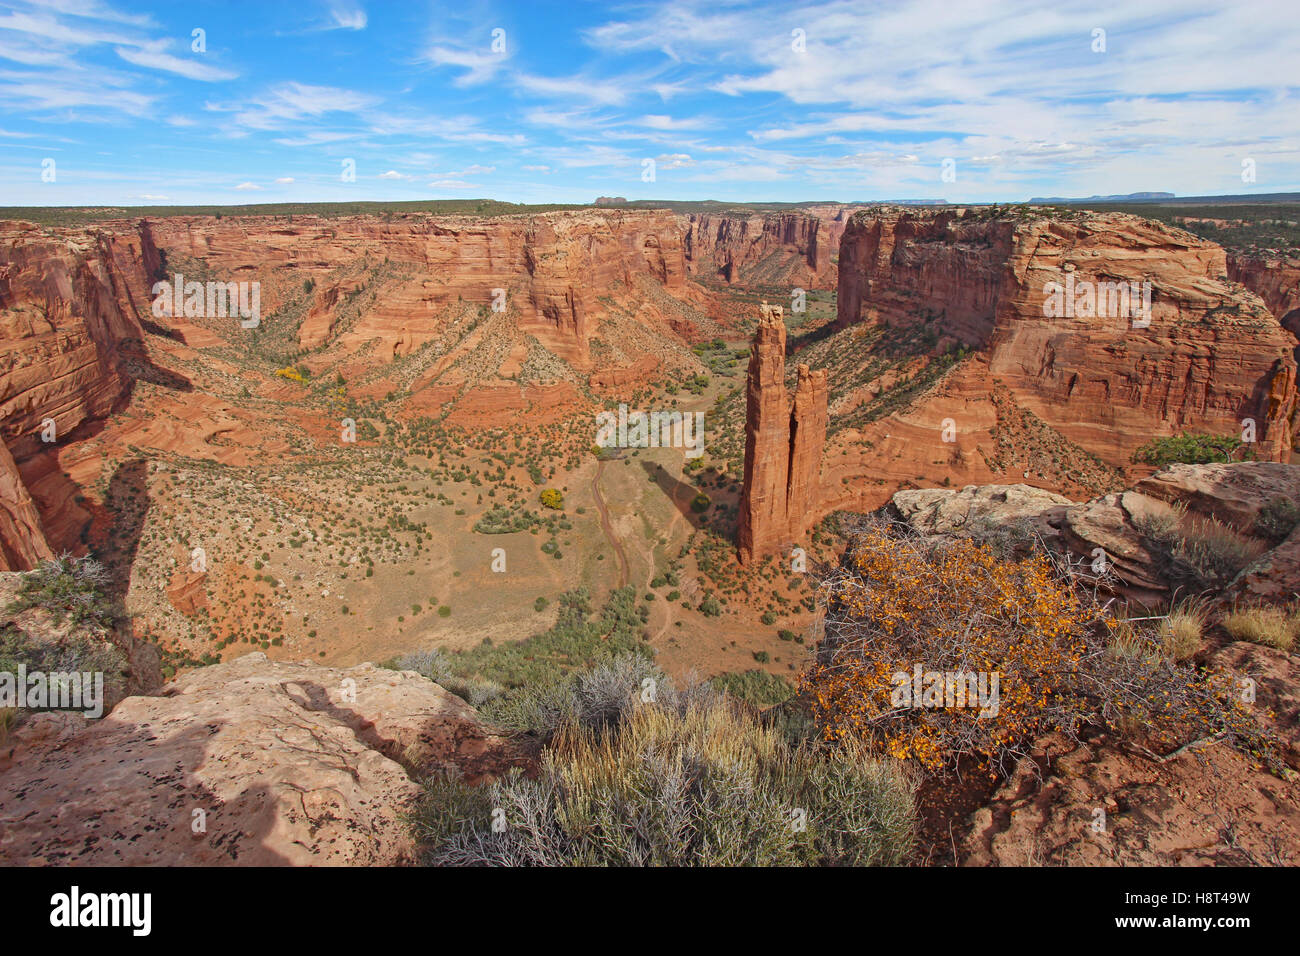 The red sandstone spire of Spider Rock at Canyon de Chelly National Monument in the Navajo Nation near Chinle, Arizona Stock Photo